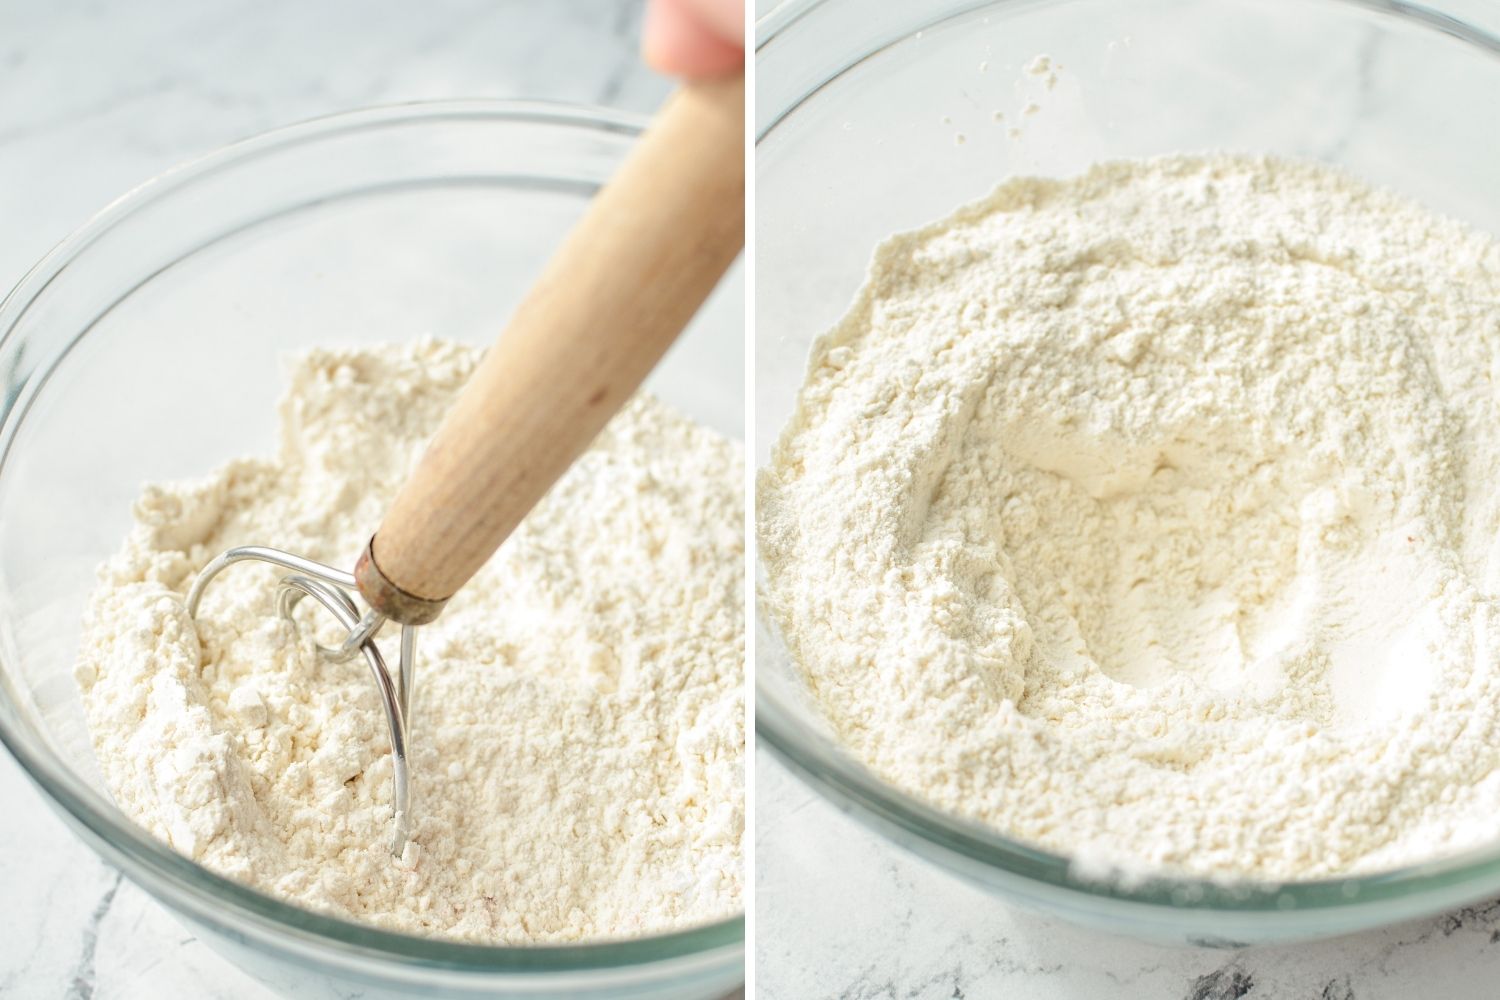 Adding flour to a bowl and whisking it together.